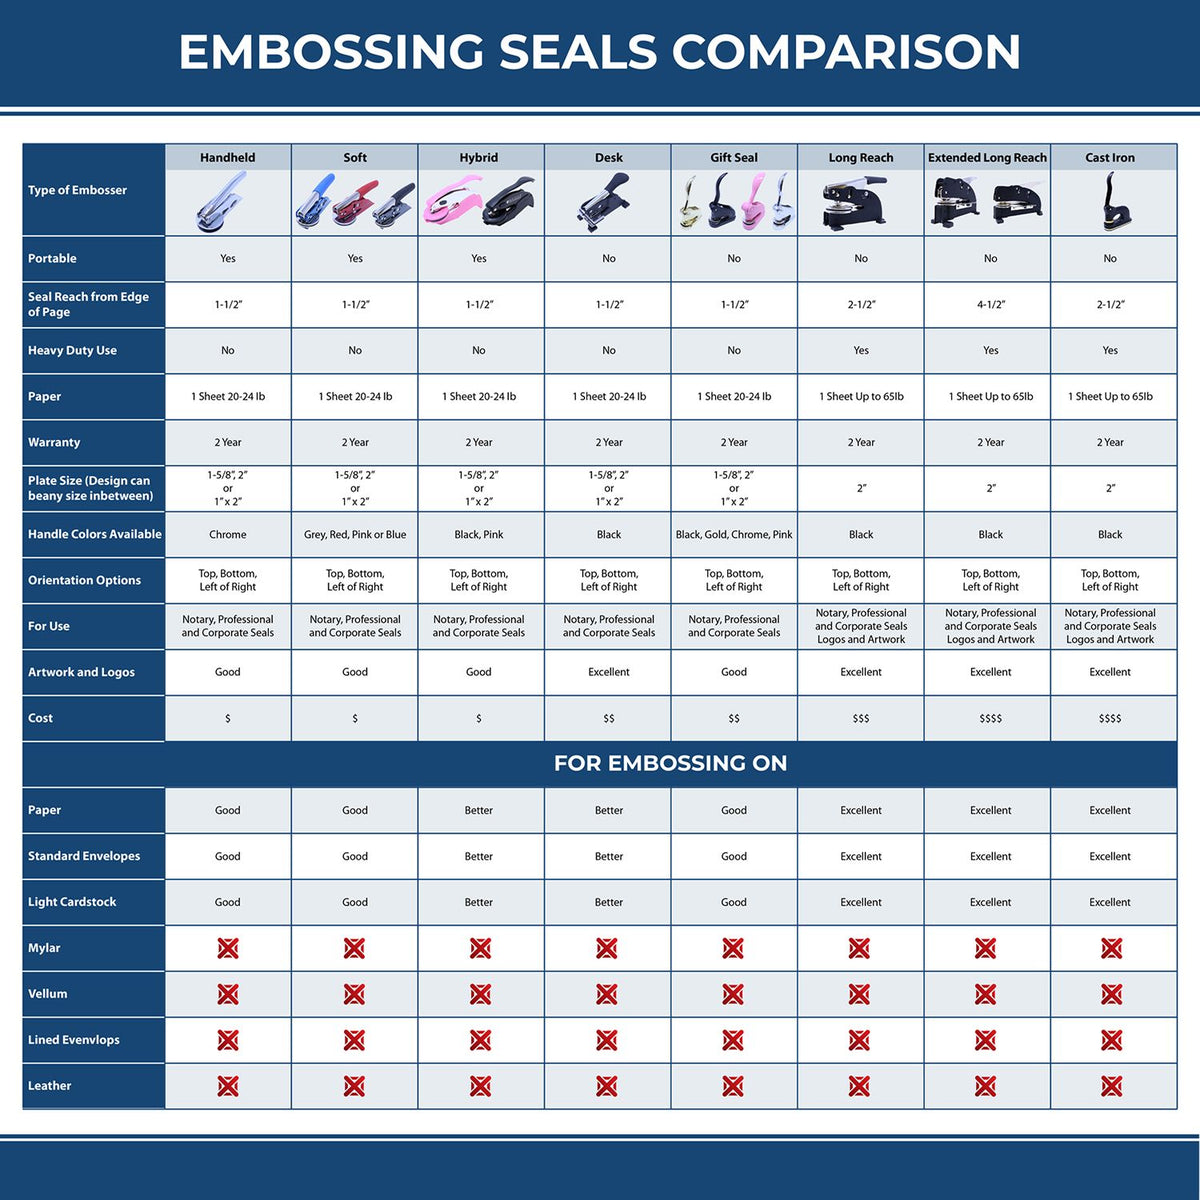 A comparison chart for the different types of mount models available for the Soft Maine Professional Geologist Seal